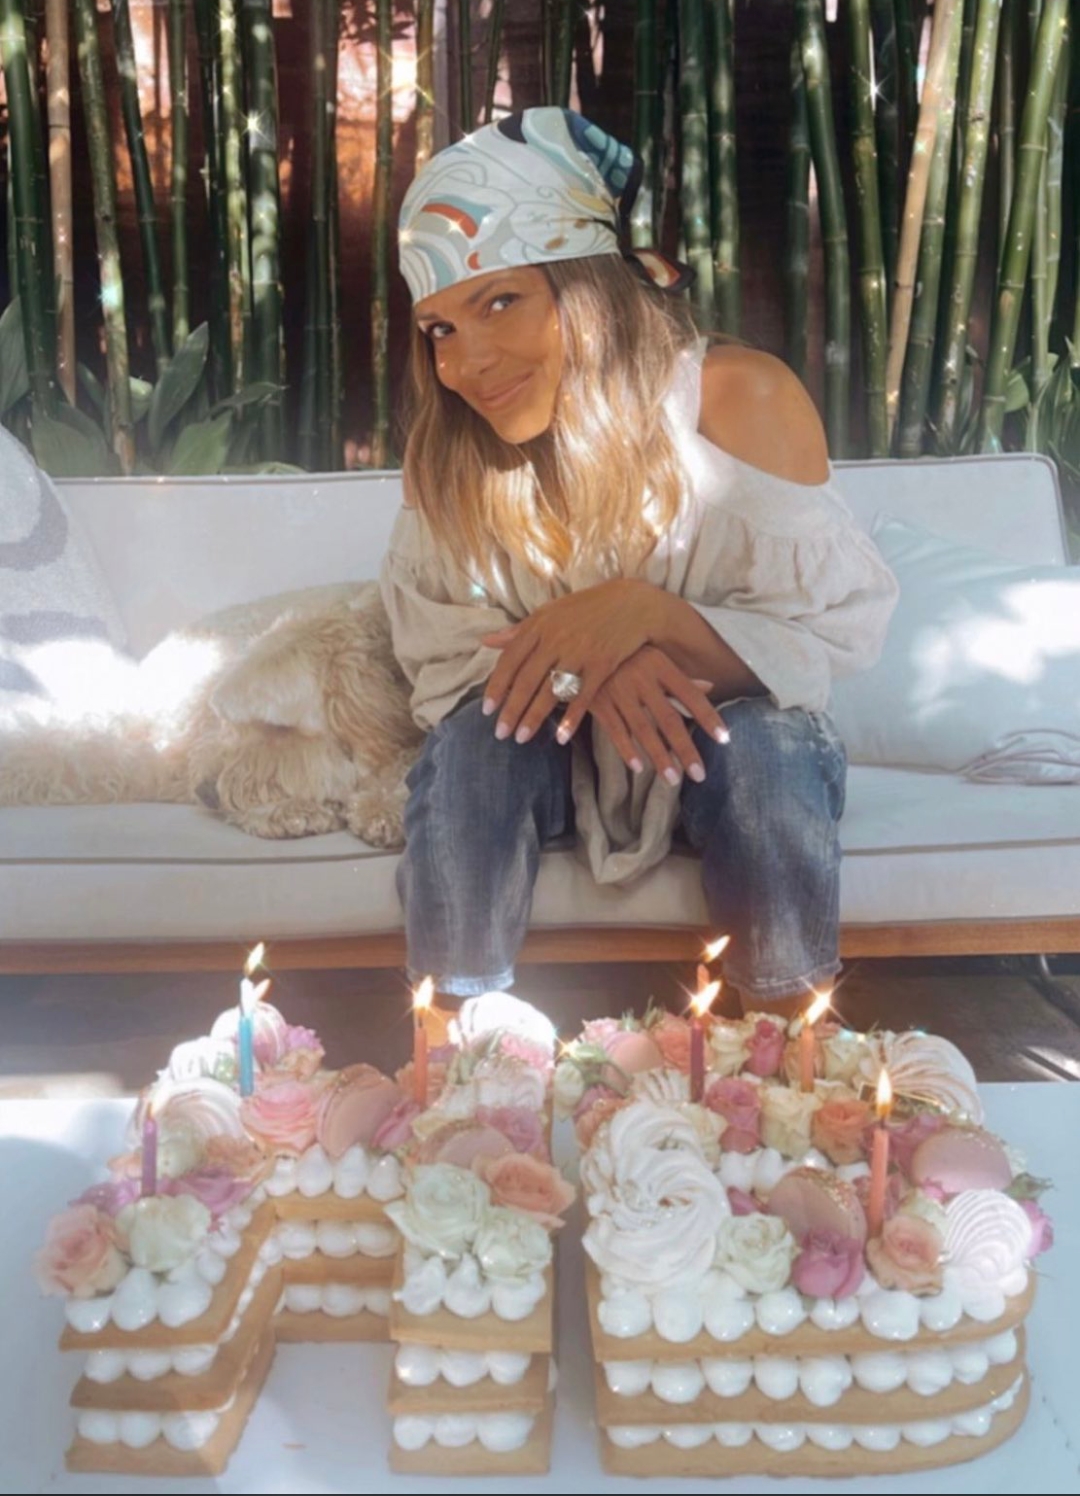 Halle Berry Marks Birthday Alongside Daughter Nahla, Embracing the ...